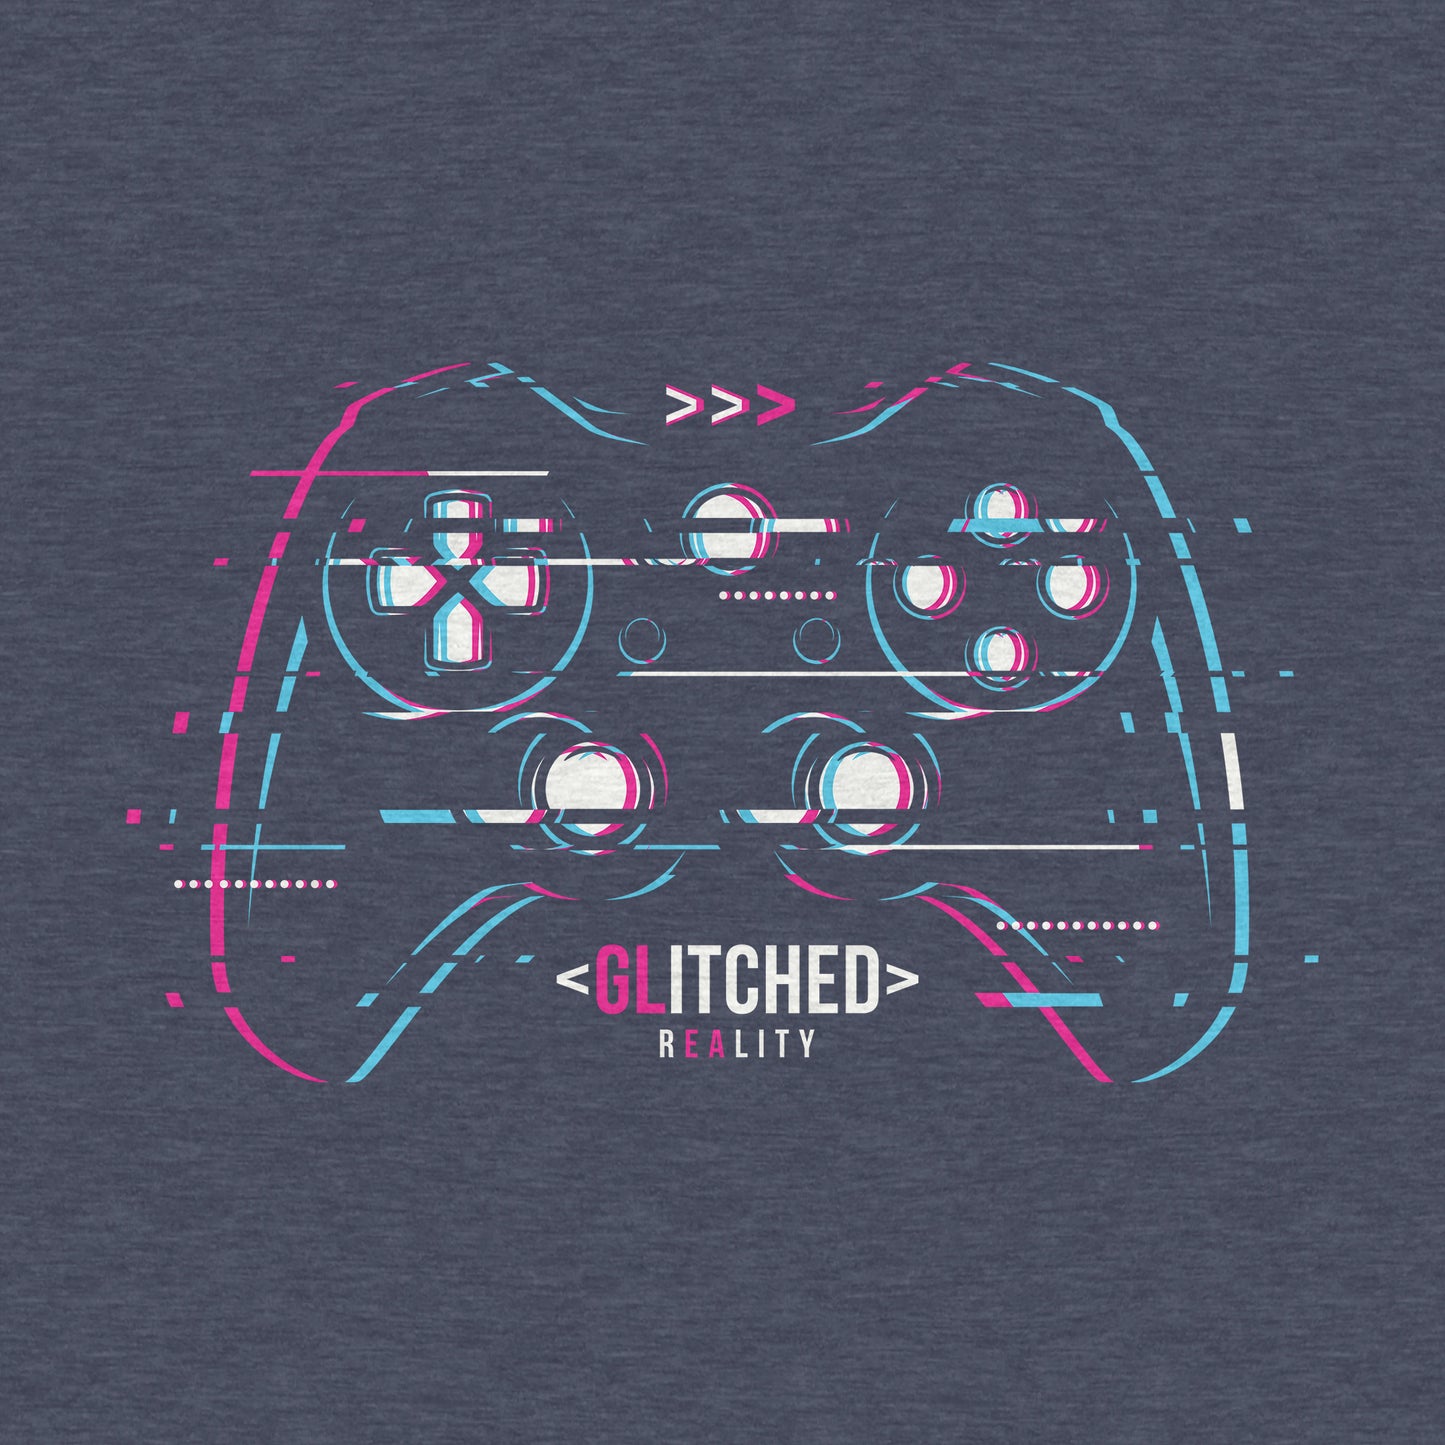 Glitched Reality - Adult Unisex Cotton/Poly Football Tee